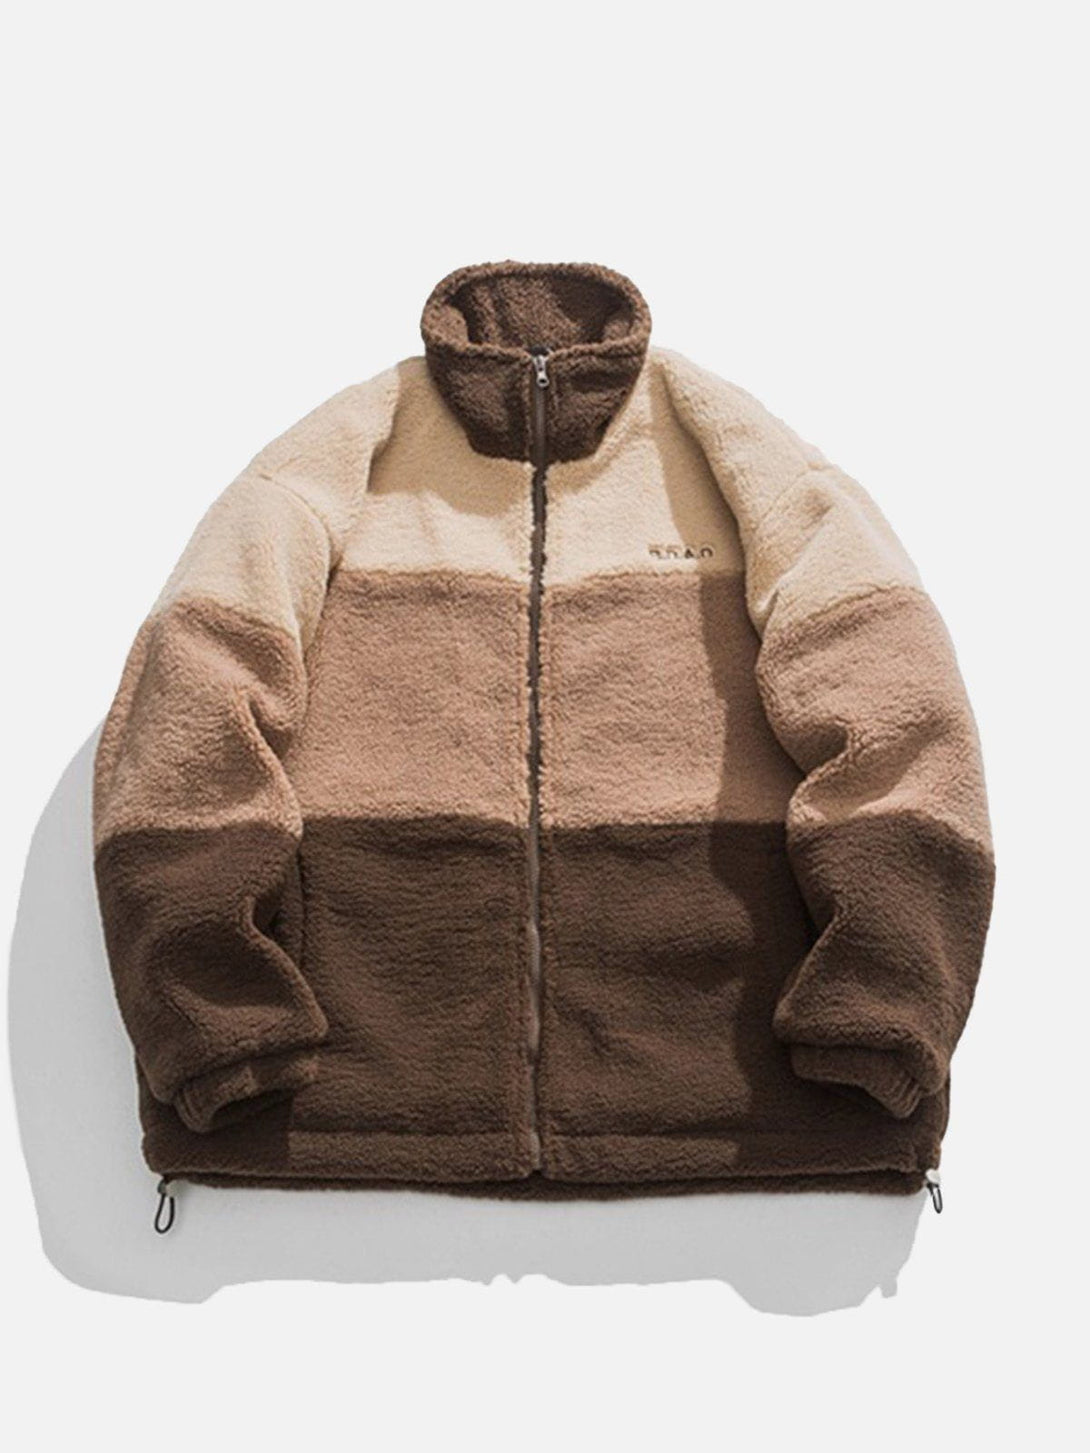 Levefly - Three-color Patchwork Sherpa Winter Coat - Streetwear Fashion - levefly.com